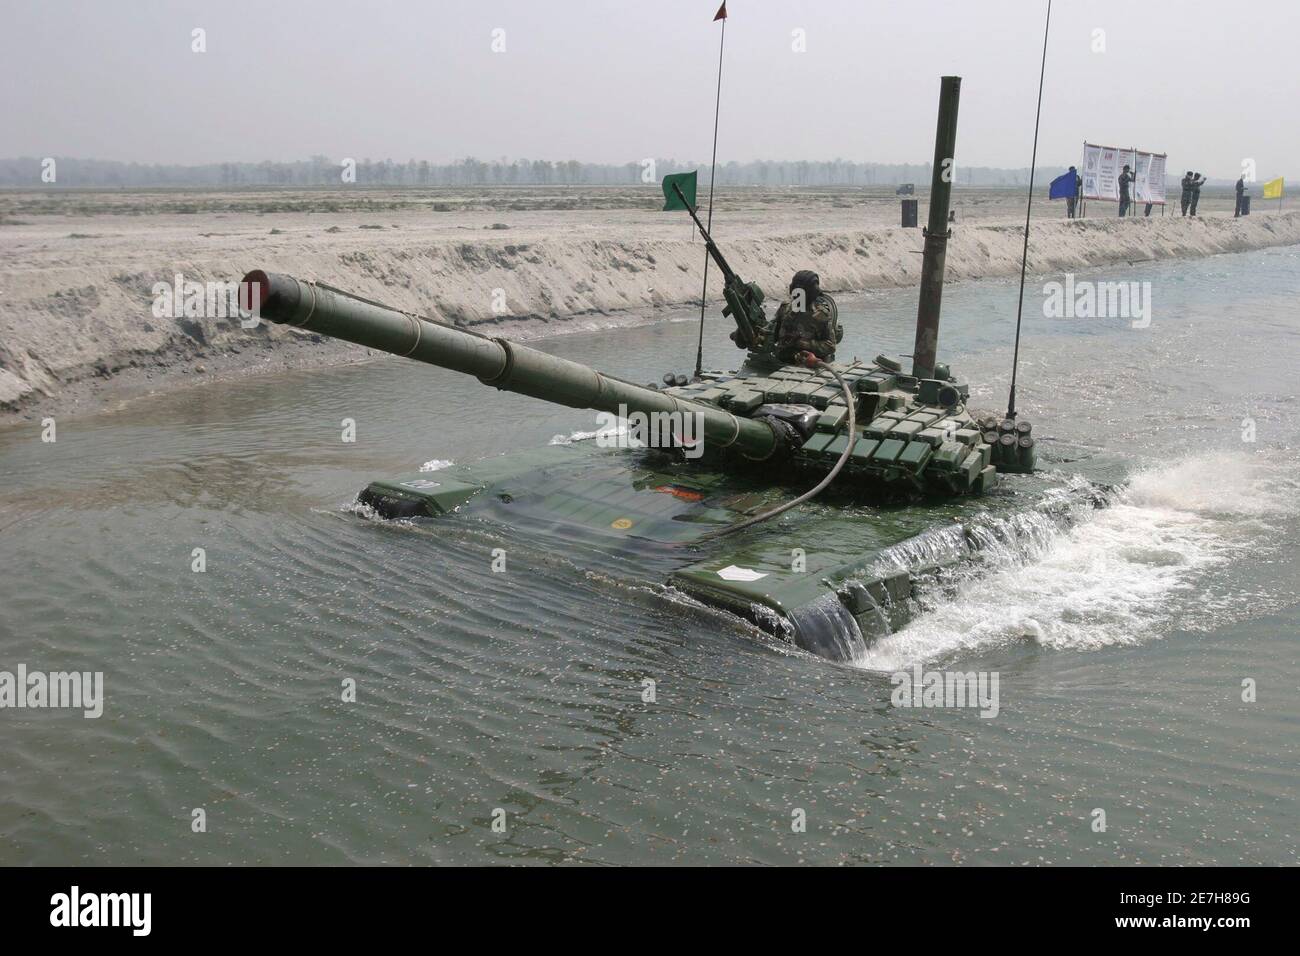 An Indian army T-72 tank crosses the Gish river during a military exercise at Teesta firing range, about 42 km (26 miles) north from the northeastern Indian city of Siliguri, March 15, 2008.   REUTERS/Rupak De Chowdhuri (INDIA) Stock Photo